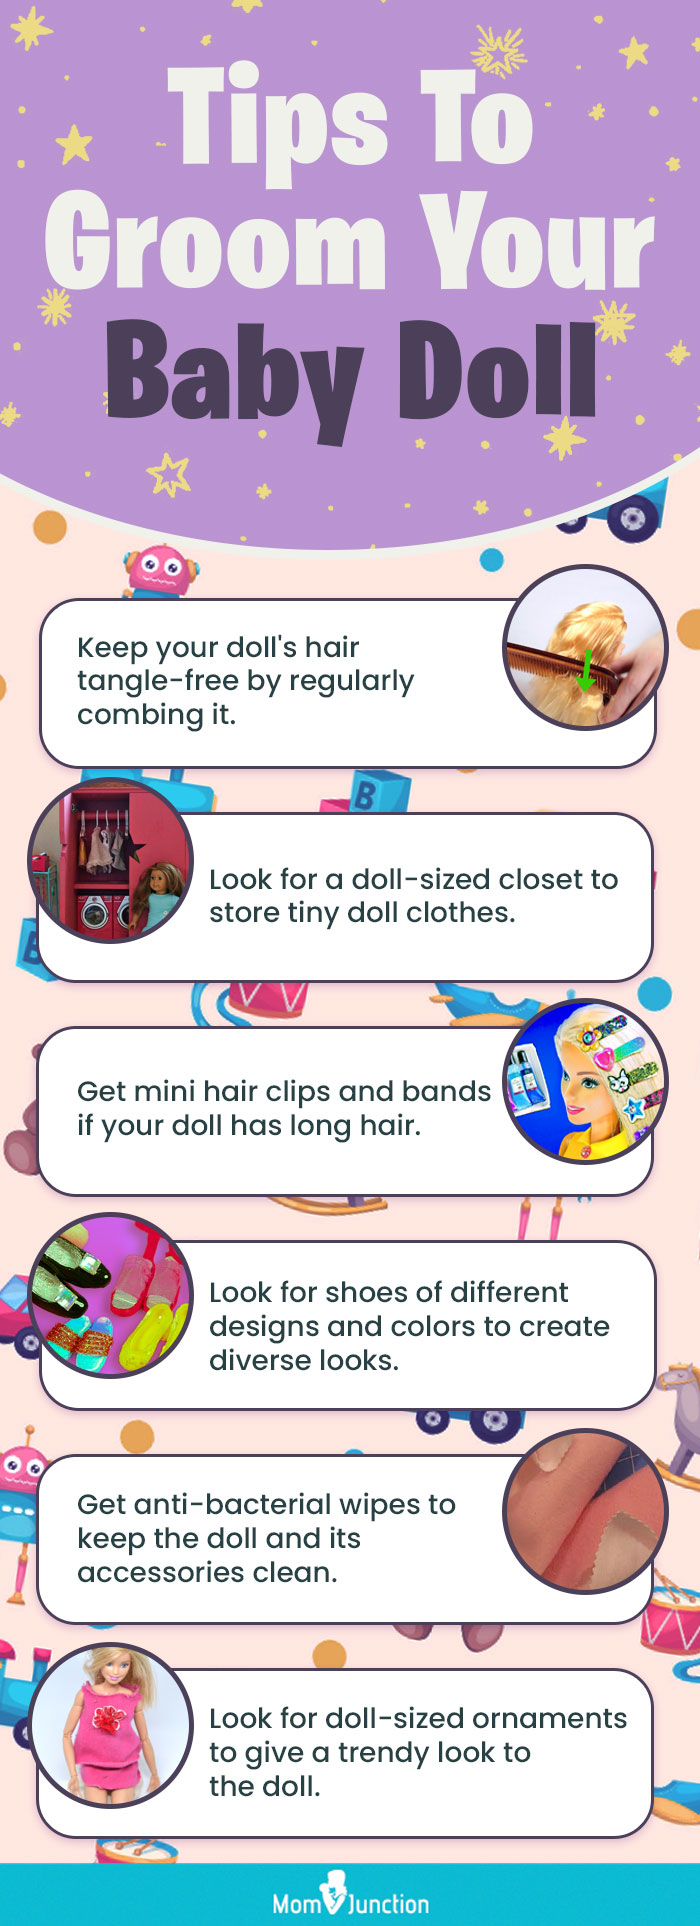 Tip To Groom Your Baby Doll (infographic)